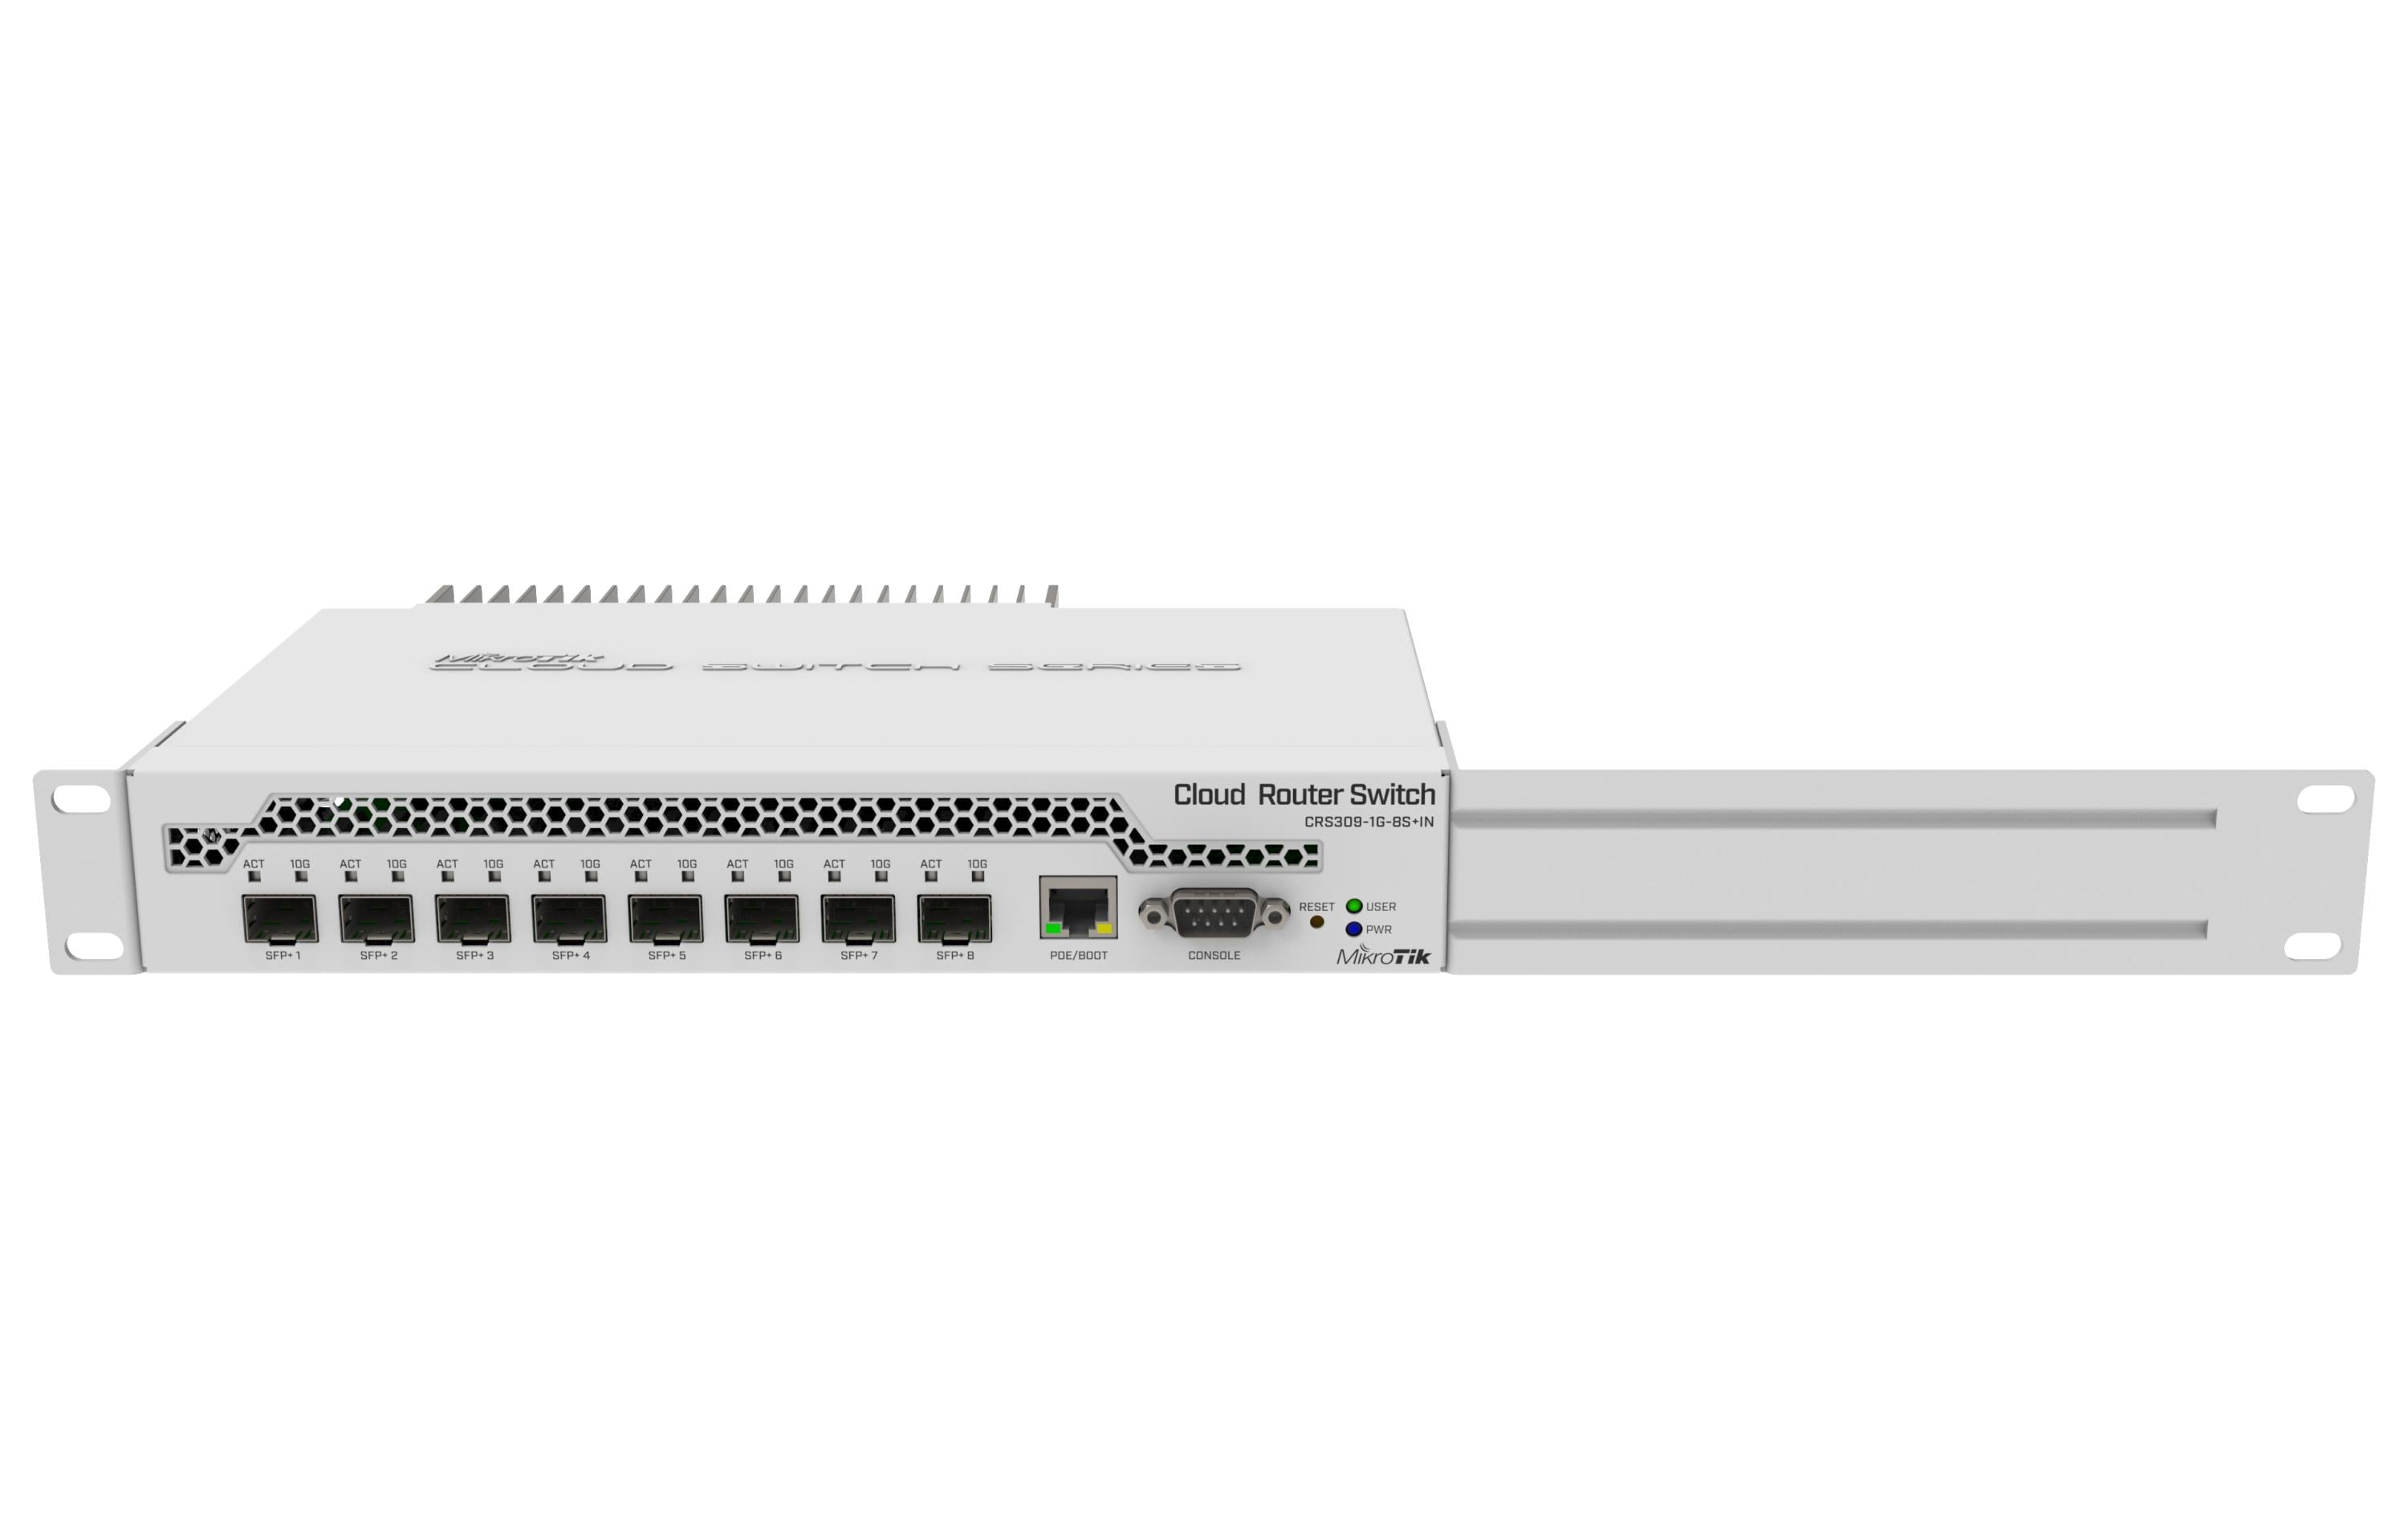 MikroTik SFP Switch CRS309-1G-8S+IN 9 Port